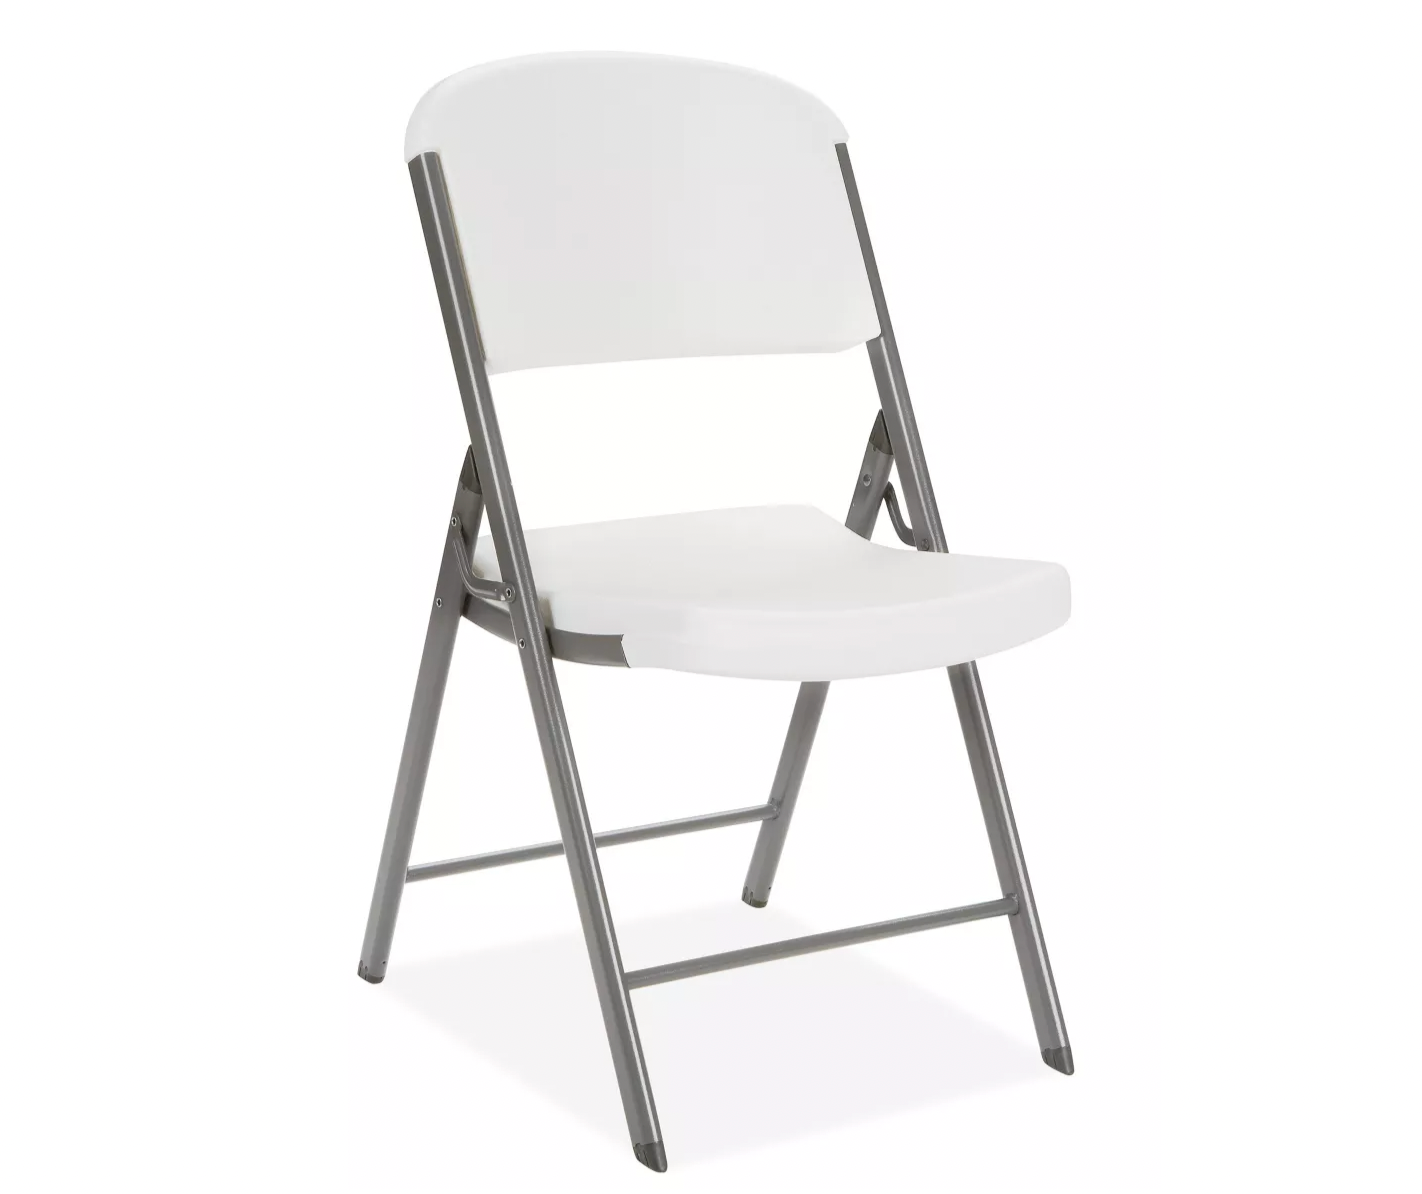 Deluxe Plastic Folding Chair White